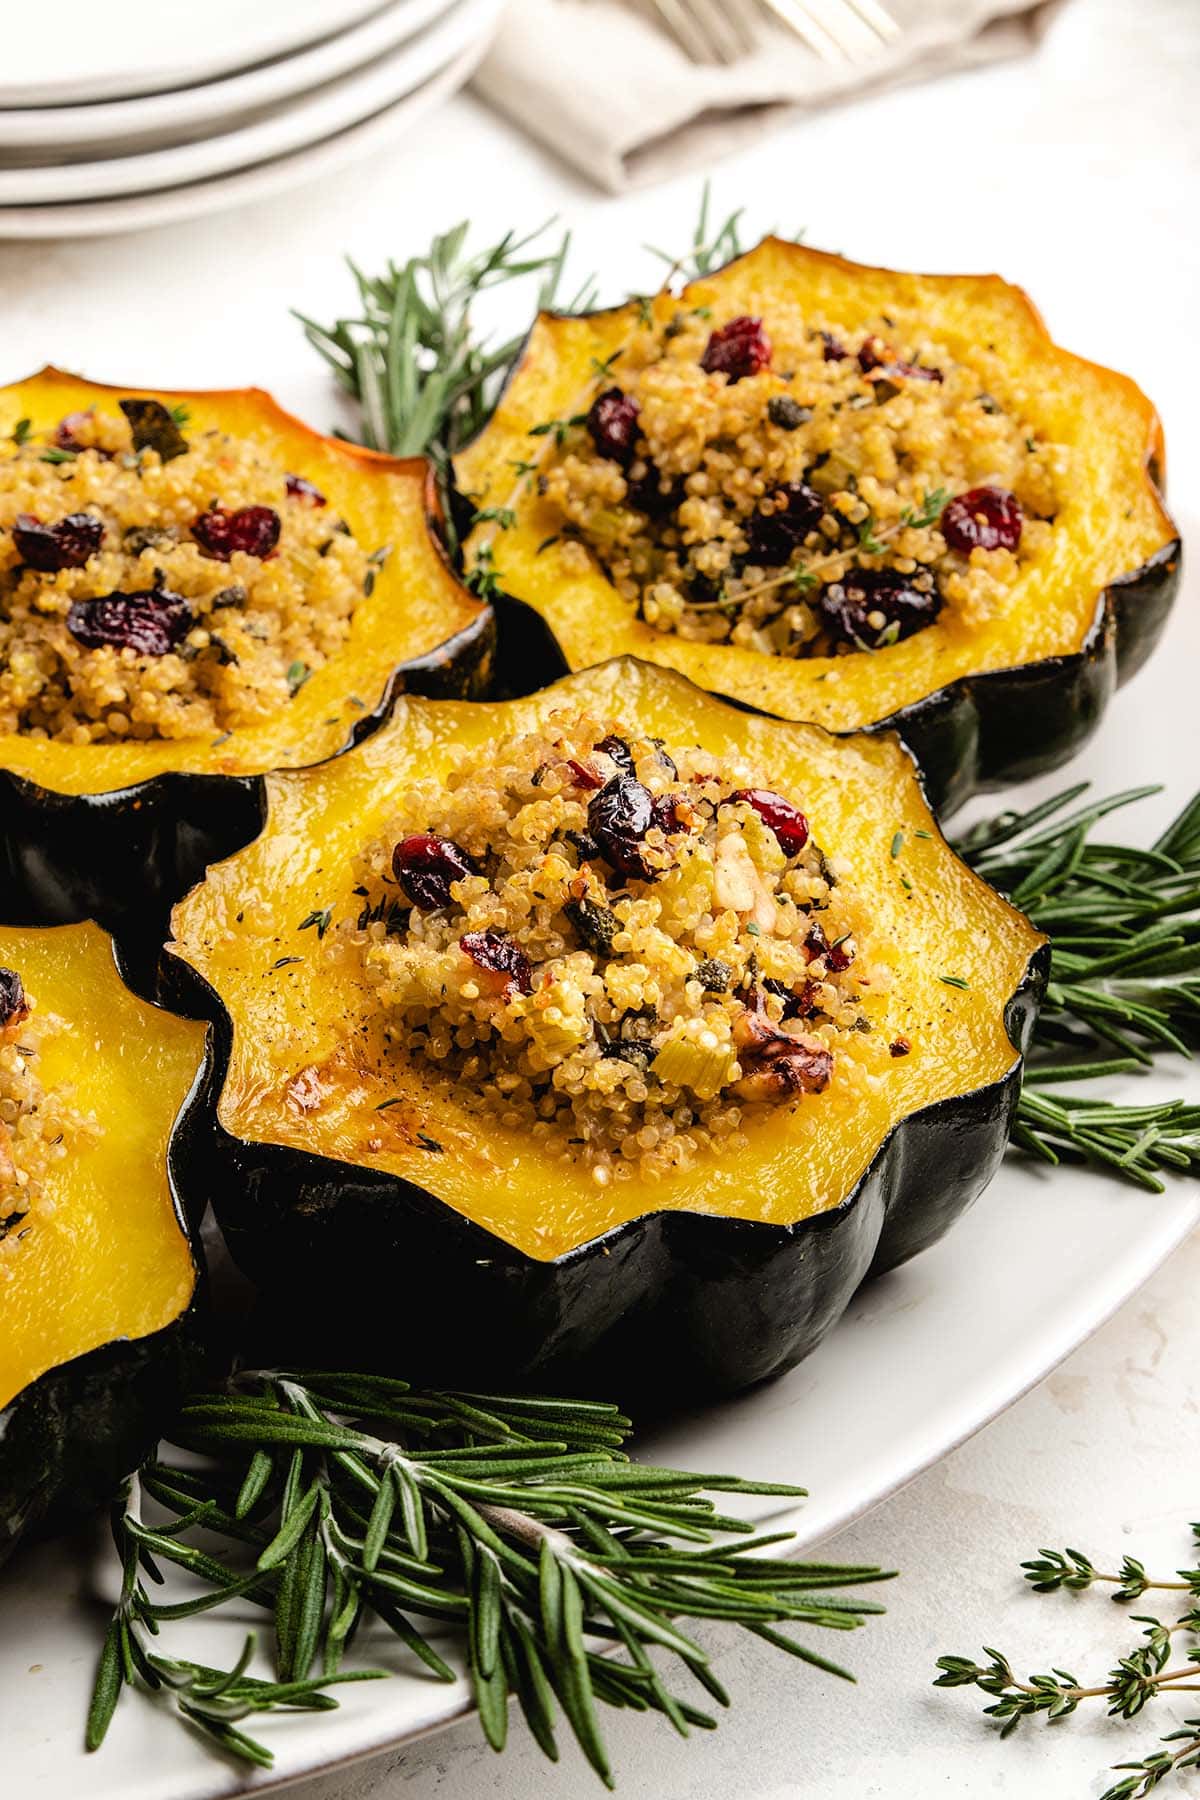 Quinoa Stuffed Acorn Squash on a white serving tray surrounded by fresh herbs.